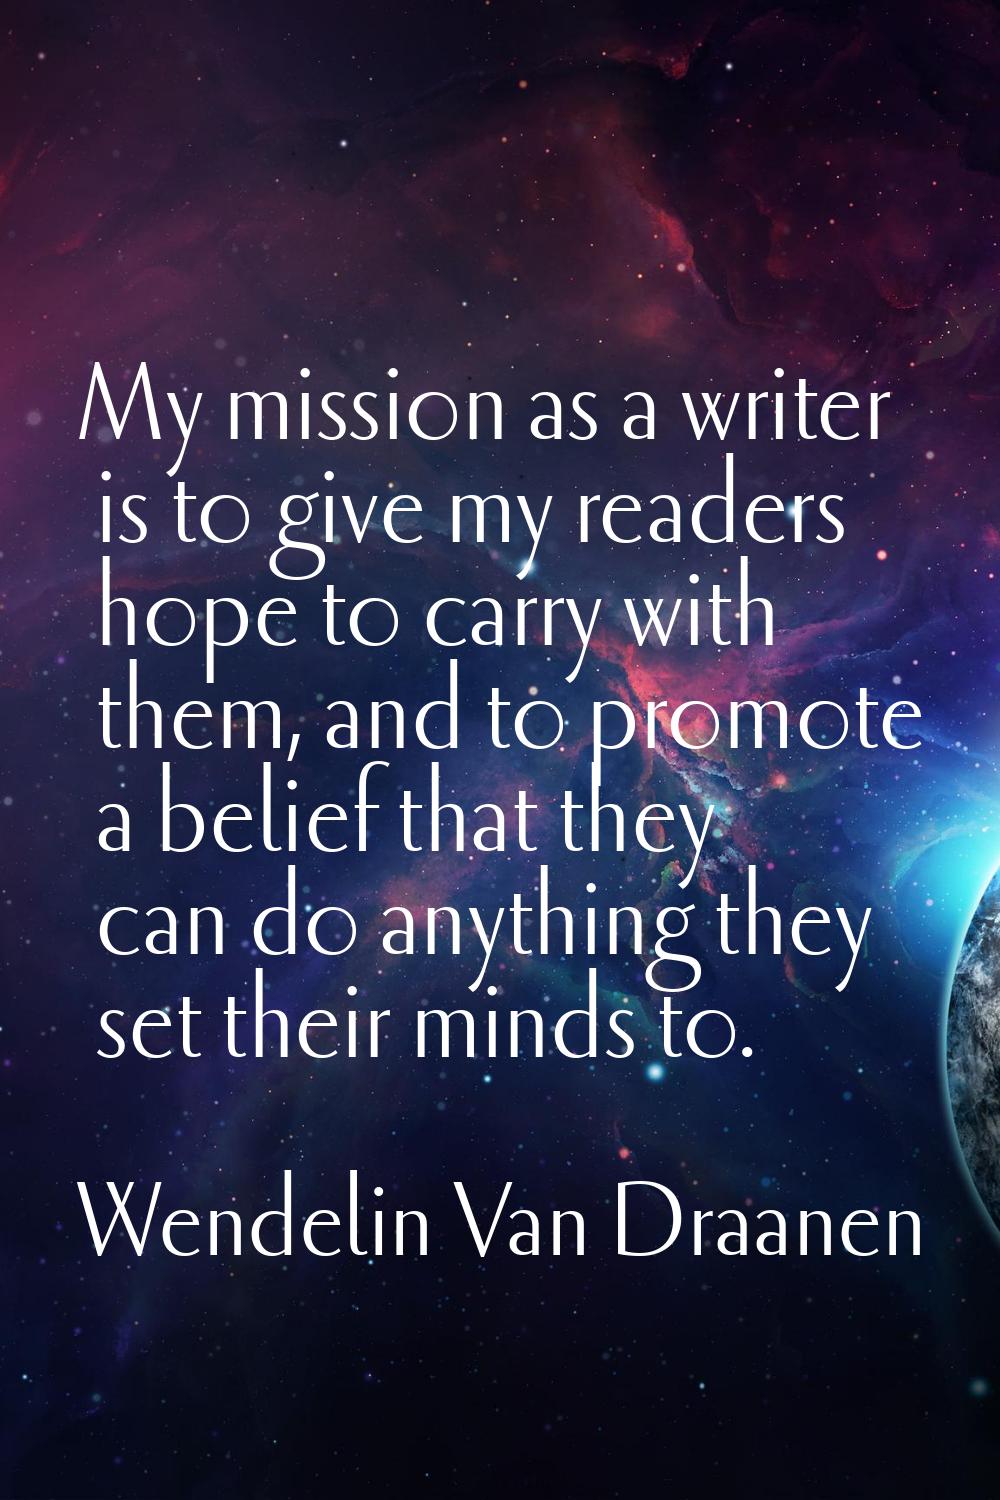 My mission as a writer is to give my readers hope to carry with them, and to promote a belief that 